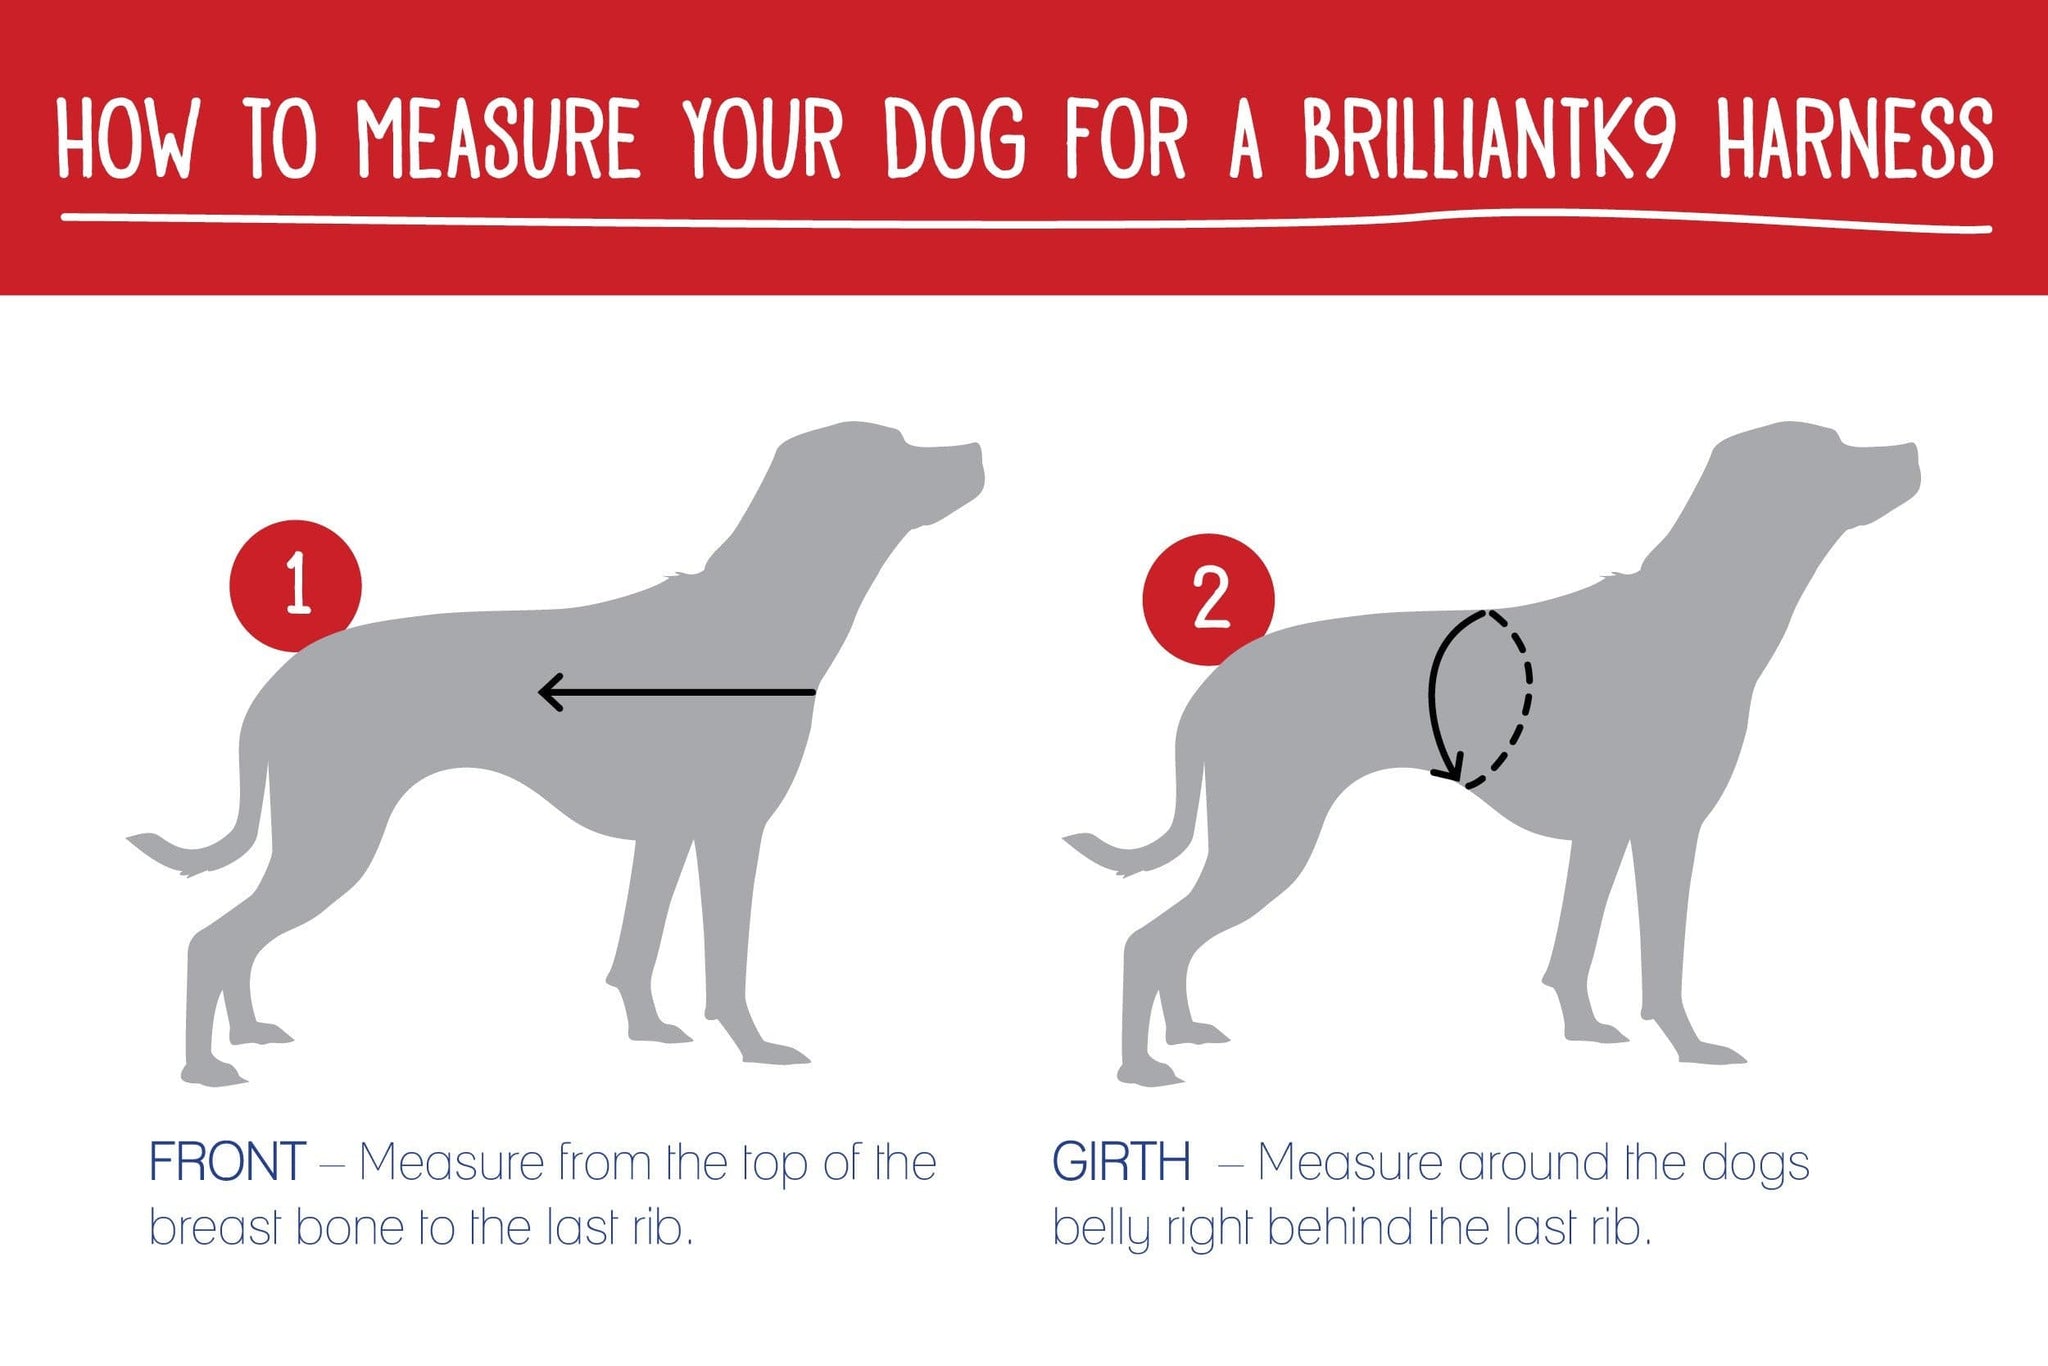 Graphic for measuring dogs for a Brilliant K9 harness